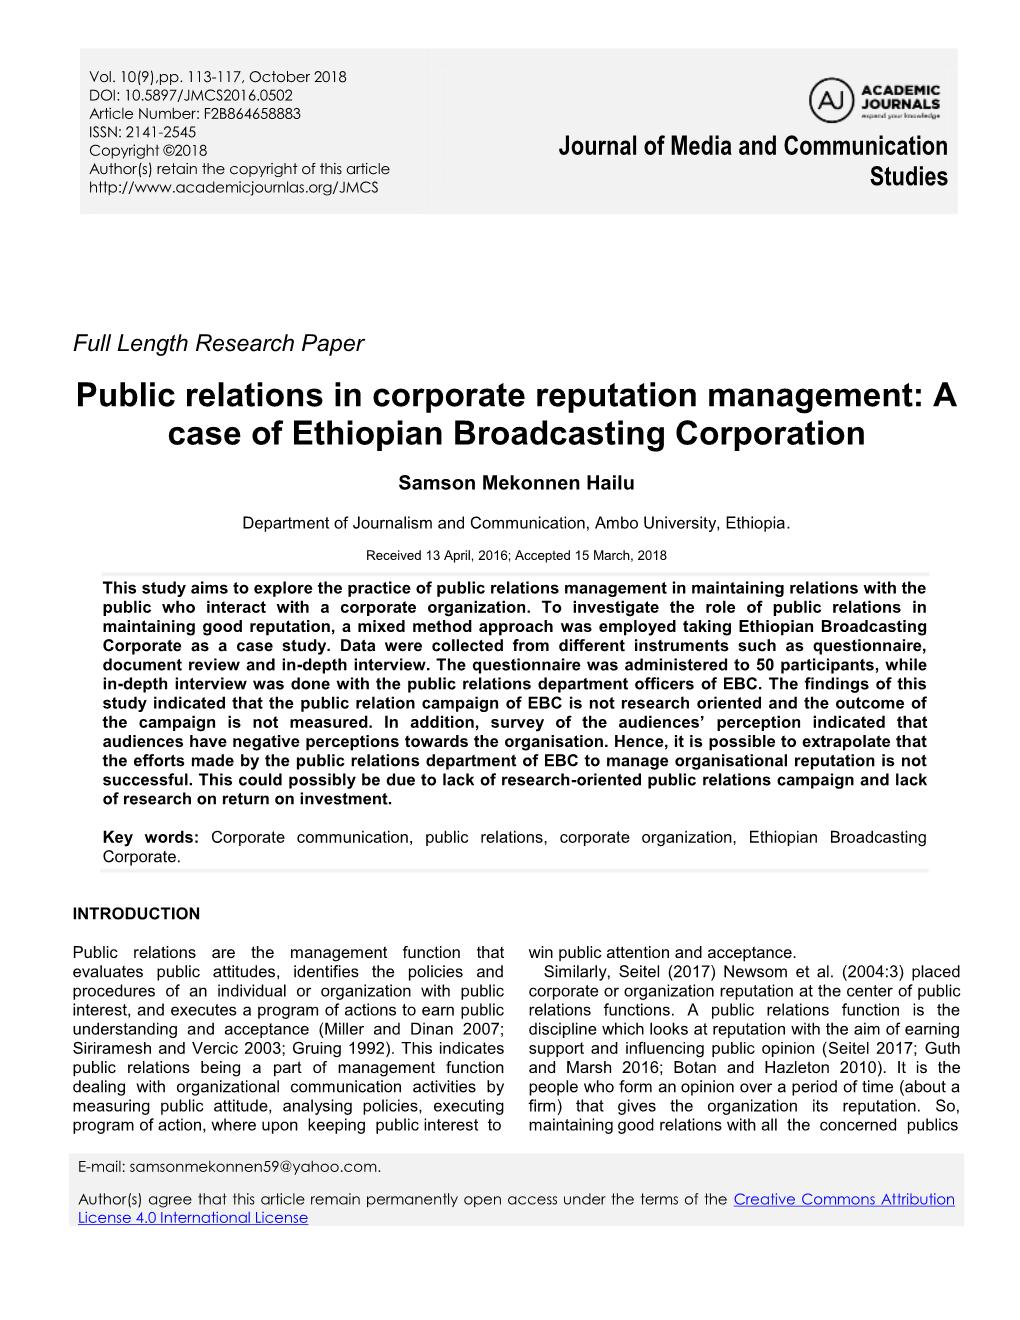 Public Relations in Corporate Reputation Management: a Case of Ethiopian Broadcasting Corporation